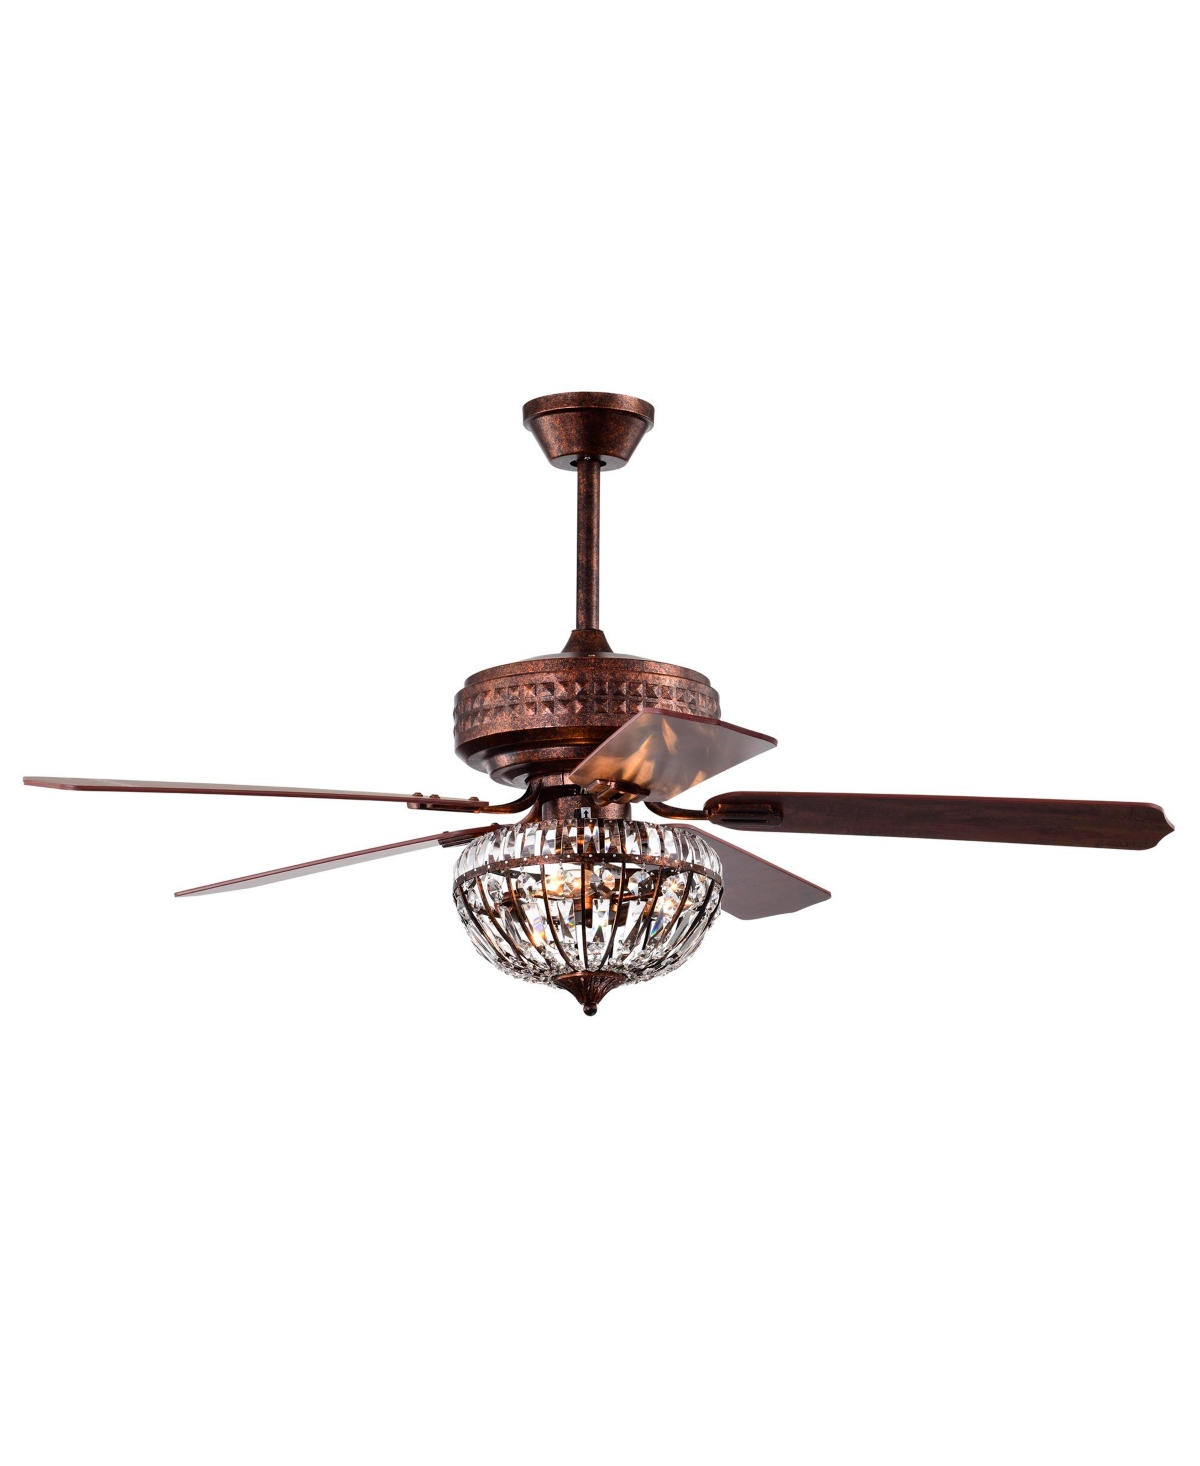 Home Accessories Violette 52" 3-light Indoor Ceiling Fan With Light Kit And Remote In Antique Copper